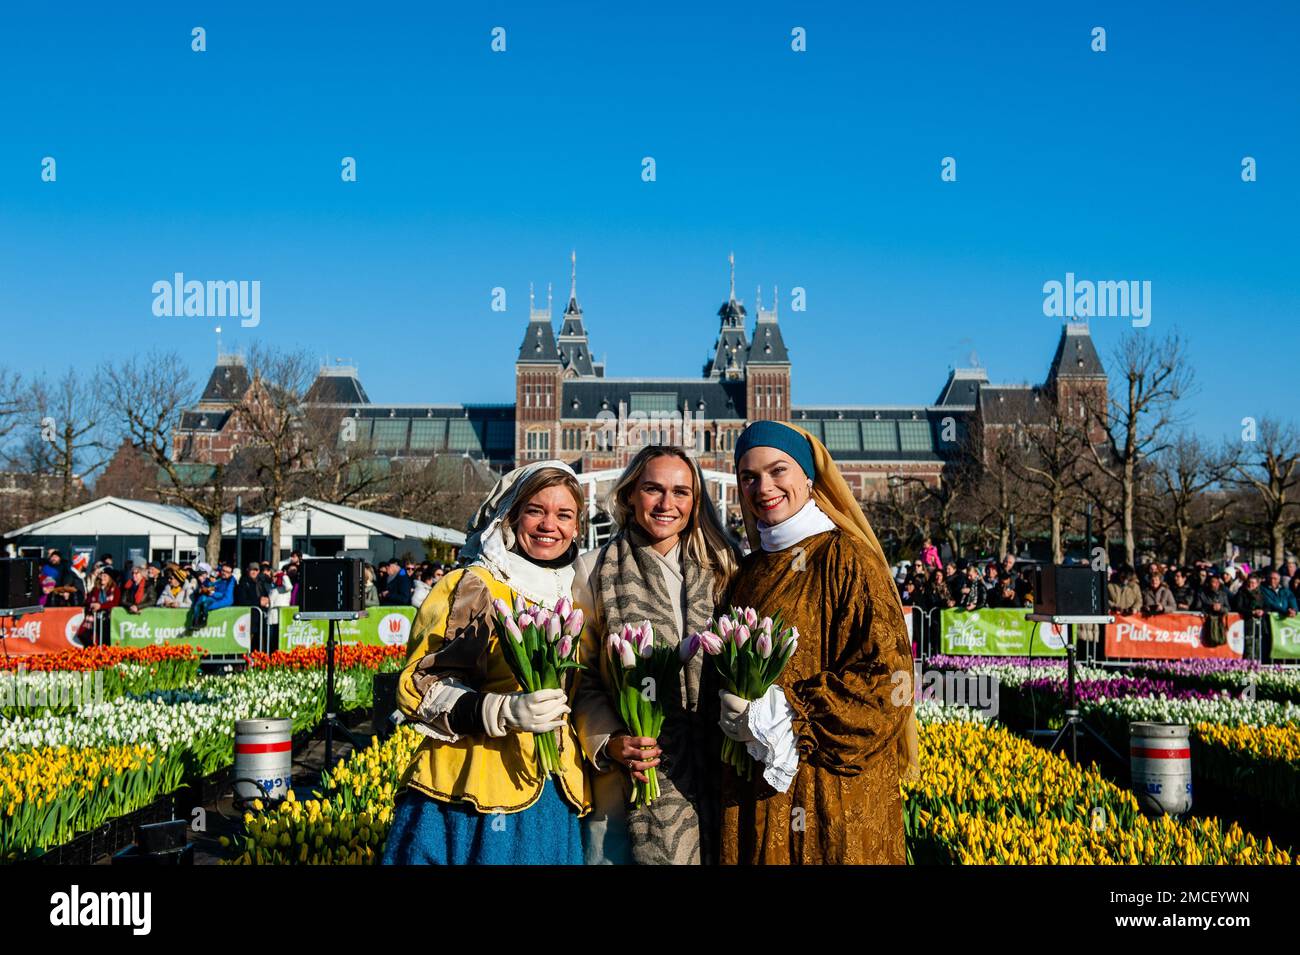 Olympic skating champion, Irene Schouten (middle) seen posing with two women dressing like two characters from the paintings of Johannes Vermeer. Each year on the 3rd Saturday of January, the National Tulip Day is celebrated in Amsterdam. Dutch tulip growers built a huge picking garden with more than 200,000 colorful tulips at the Museumplein in Amsterdam. Visitors are allowed to pick tulips for free. The event was opened by Olympic skating champion, Irene Schouten. Prior to the opening, she christened a new tulip: Tulipa 'Dutch Pearl' as a reference to the world - famous painting 'The girl wi Stock Photo